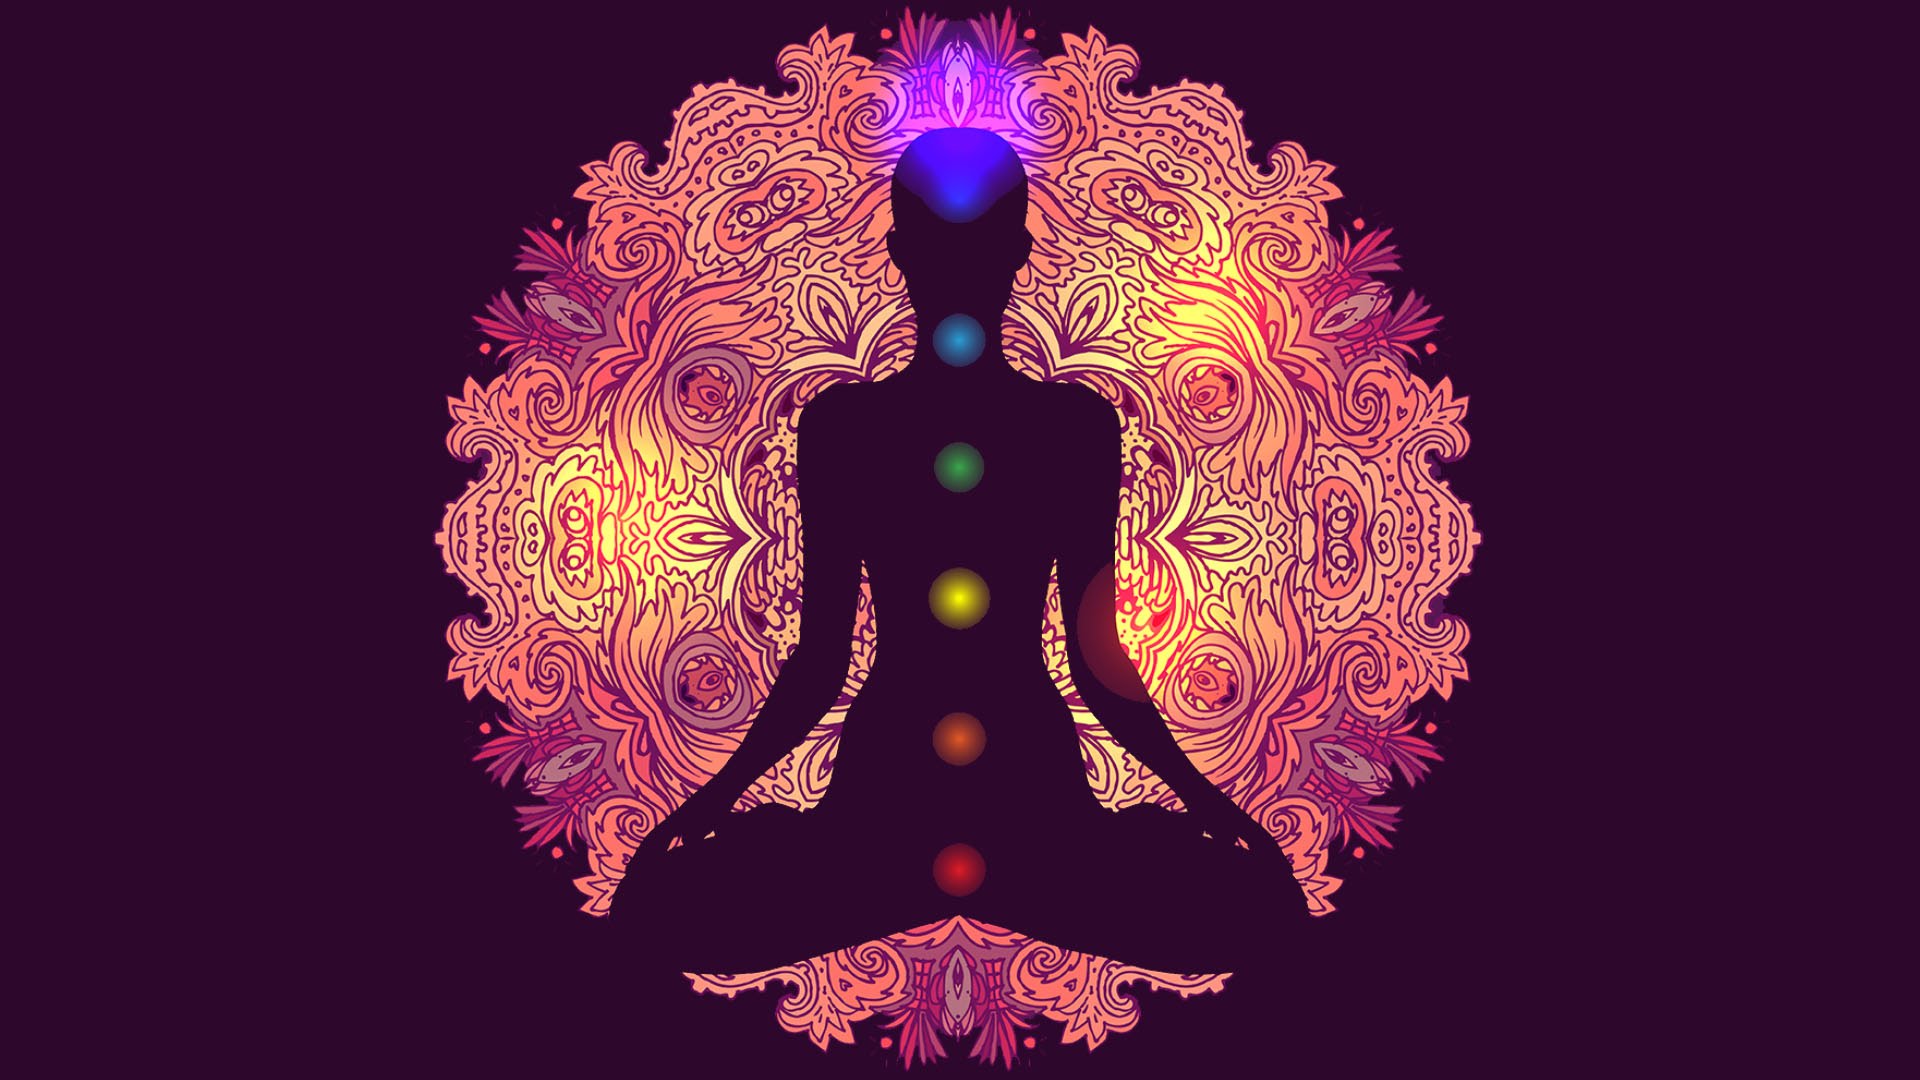 What are the uses of chakras in Buddhism? 1